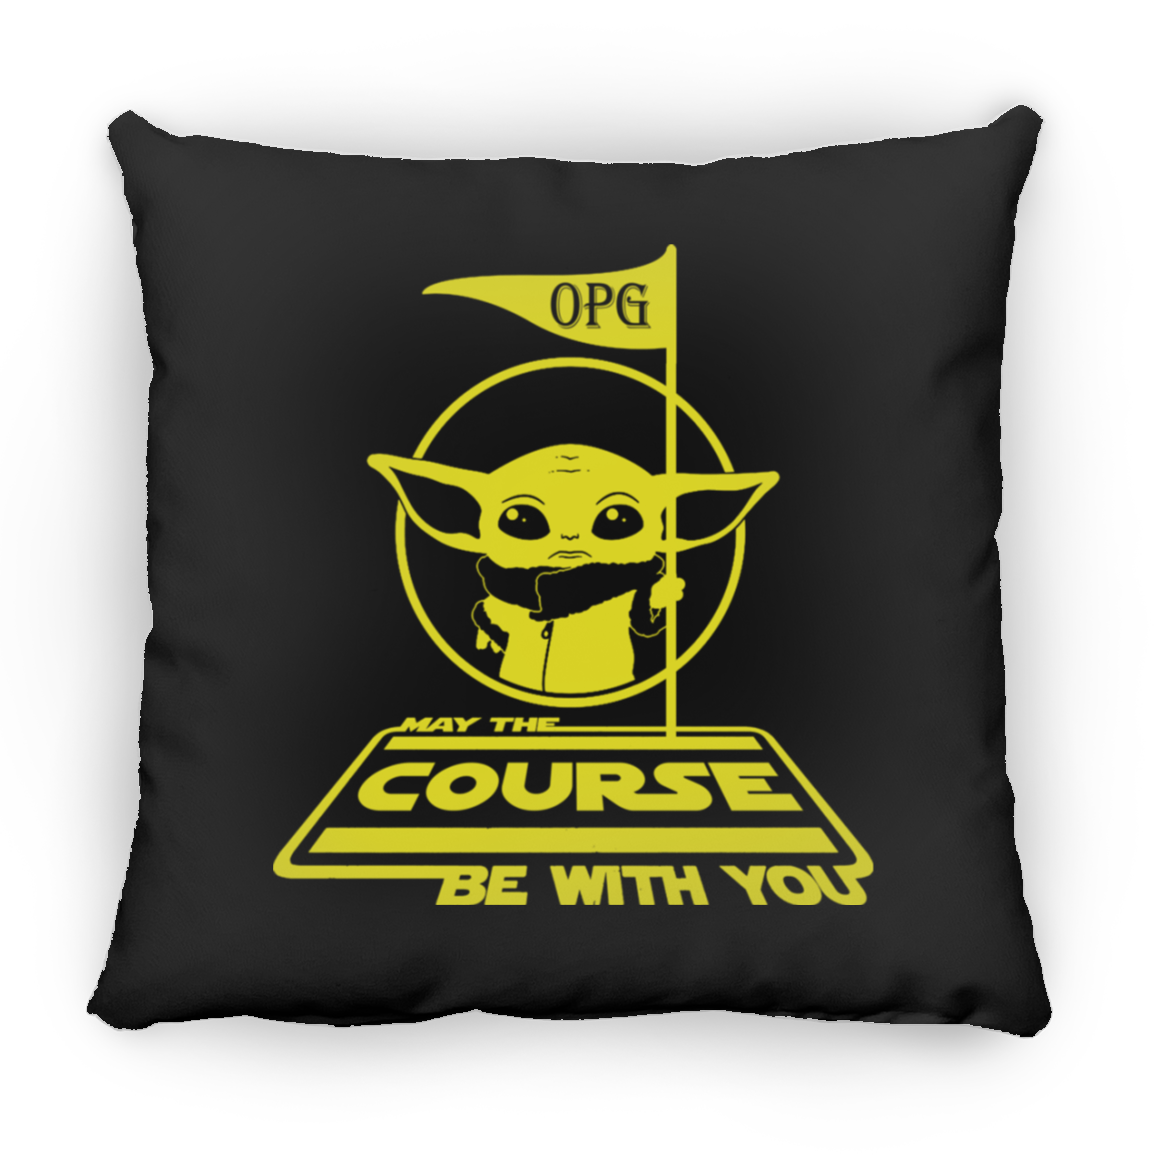 OPG Custom Design #21. May The Course Be With You. Fan Art. Square Pillow 18x18